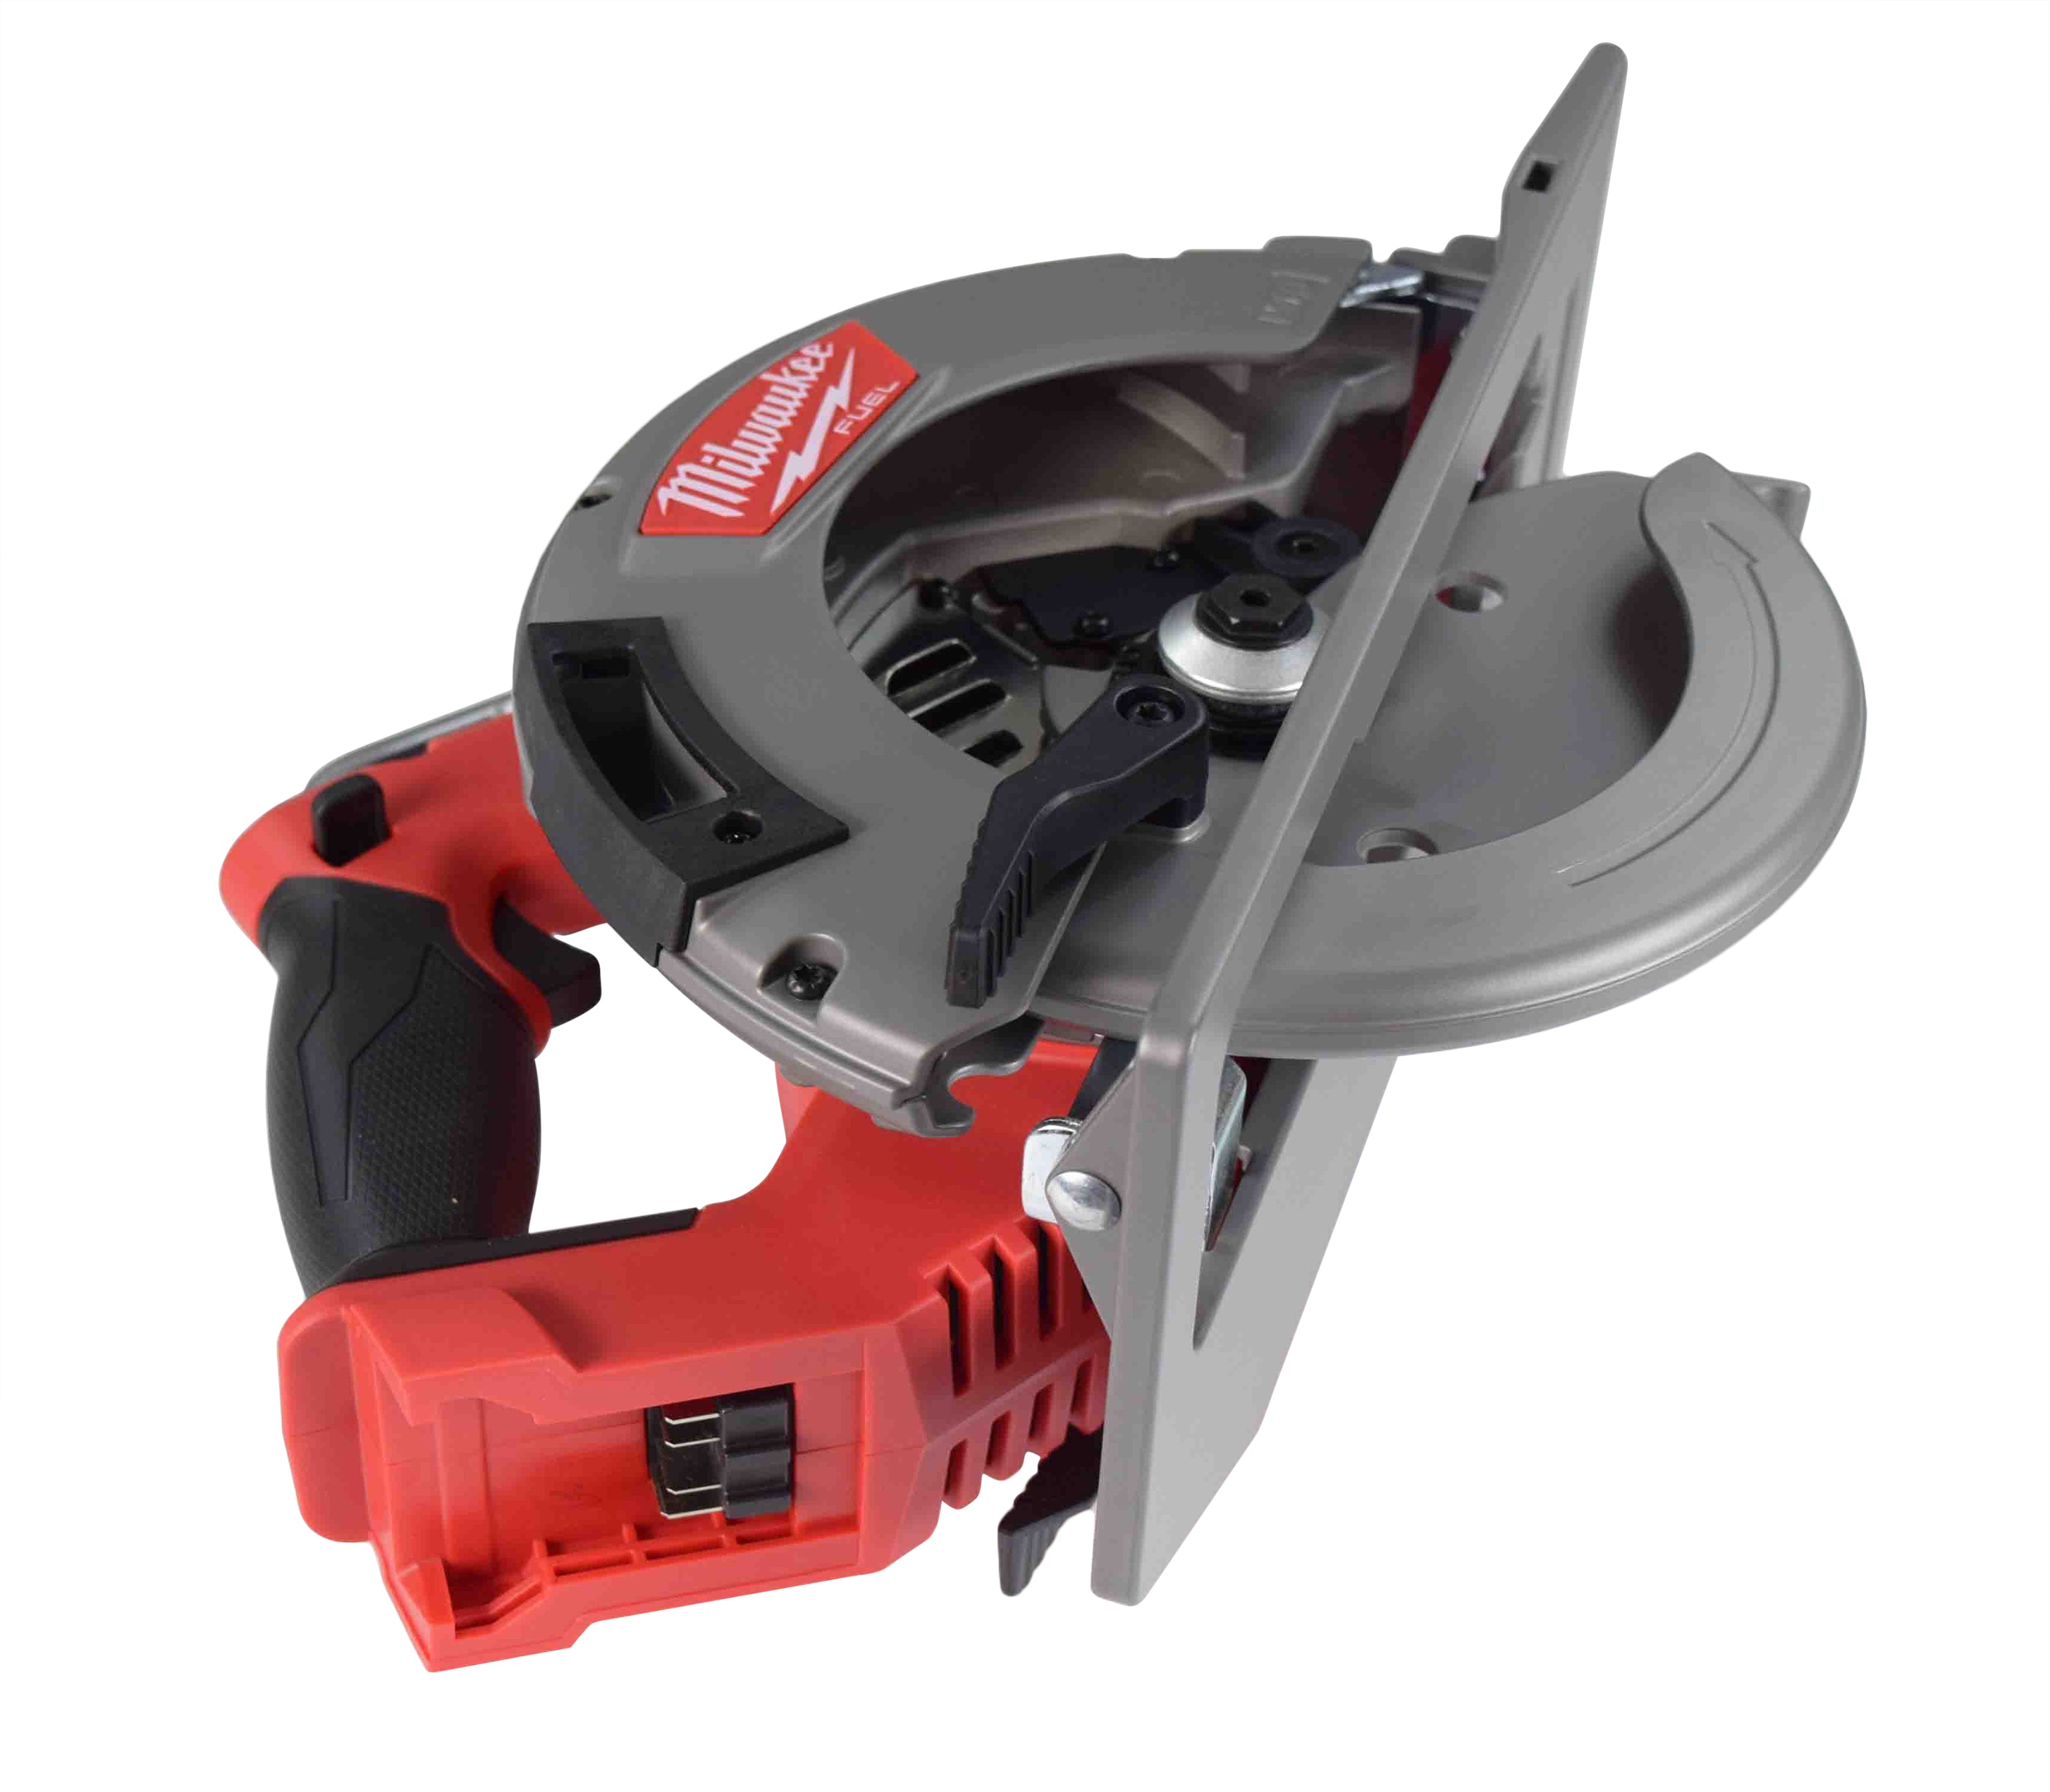 Milwaukee 2732-20 M18 18V Lithium-Ion FUEL Circular Saw (Tool Only)